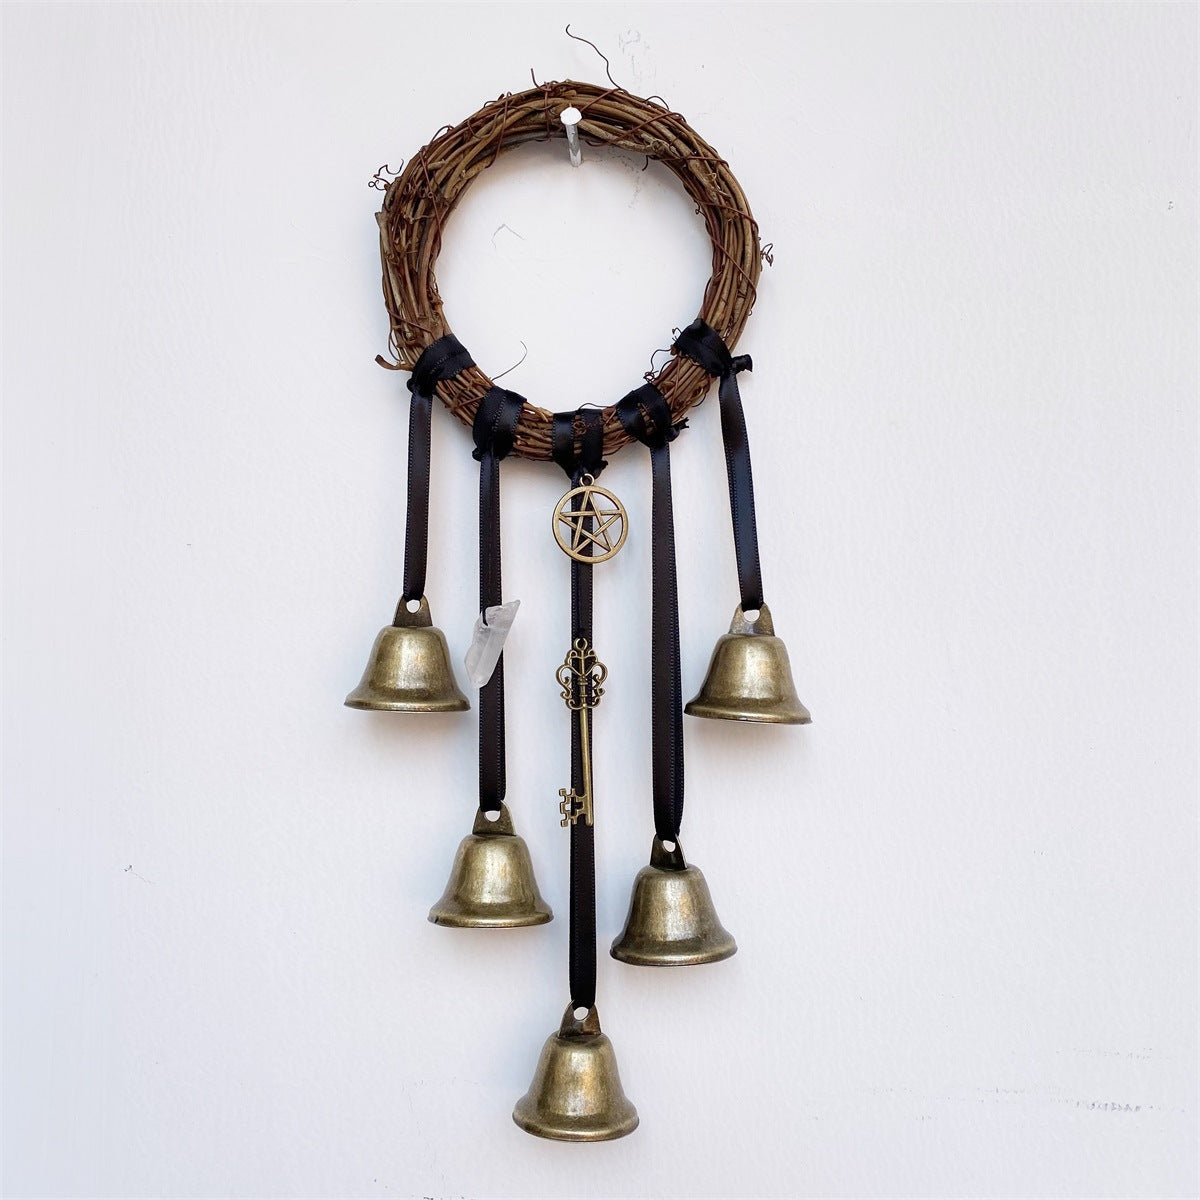 Rattan Circle with Bells